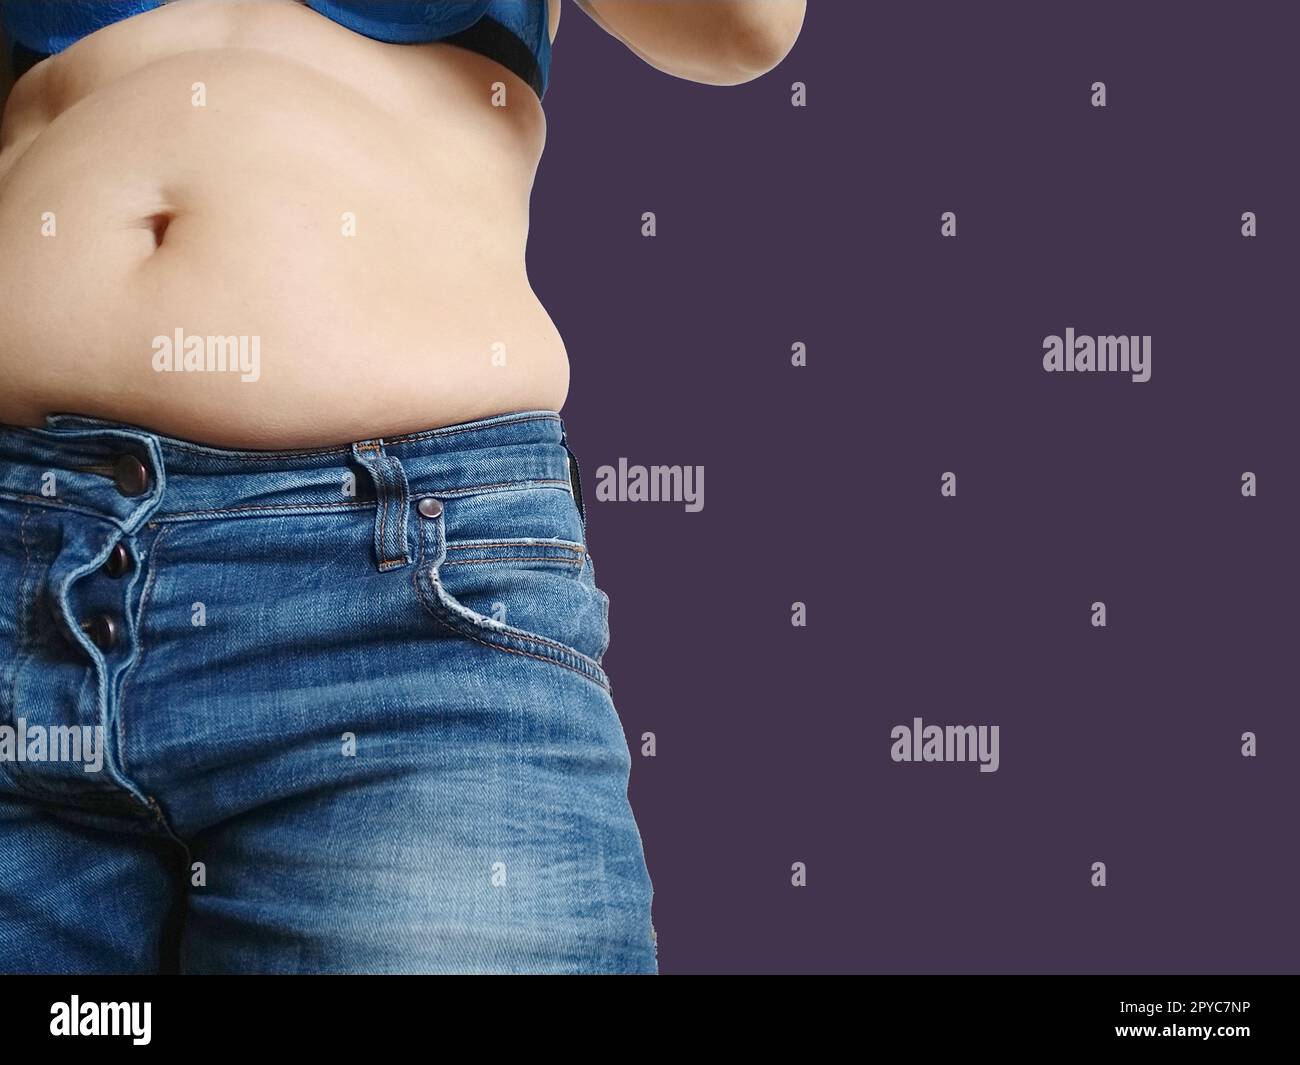 Saggy belly. Folds of leather and fat on the side hanging over the waist of the jeans. A figure overeating or pregnancy. Obesity and Diabetes. Velvet violet background. Cellulite flabby muscles. Stock Photo